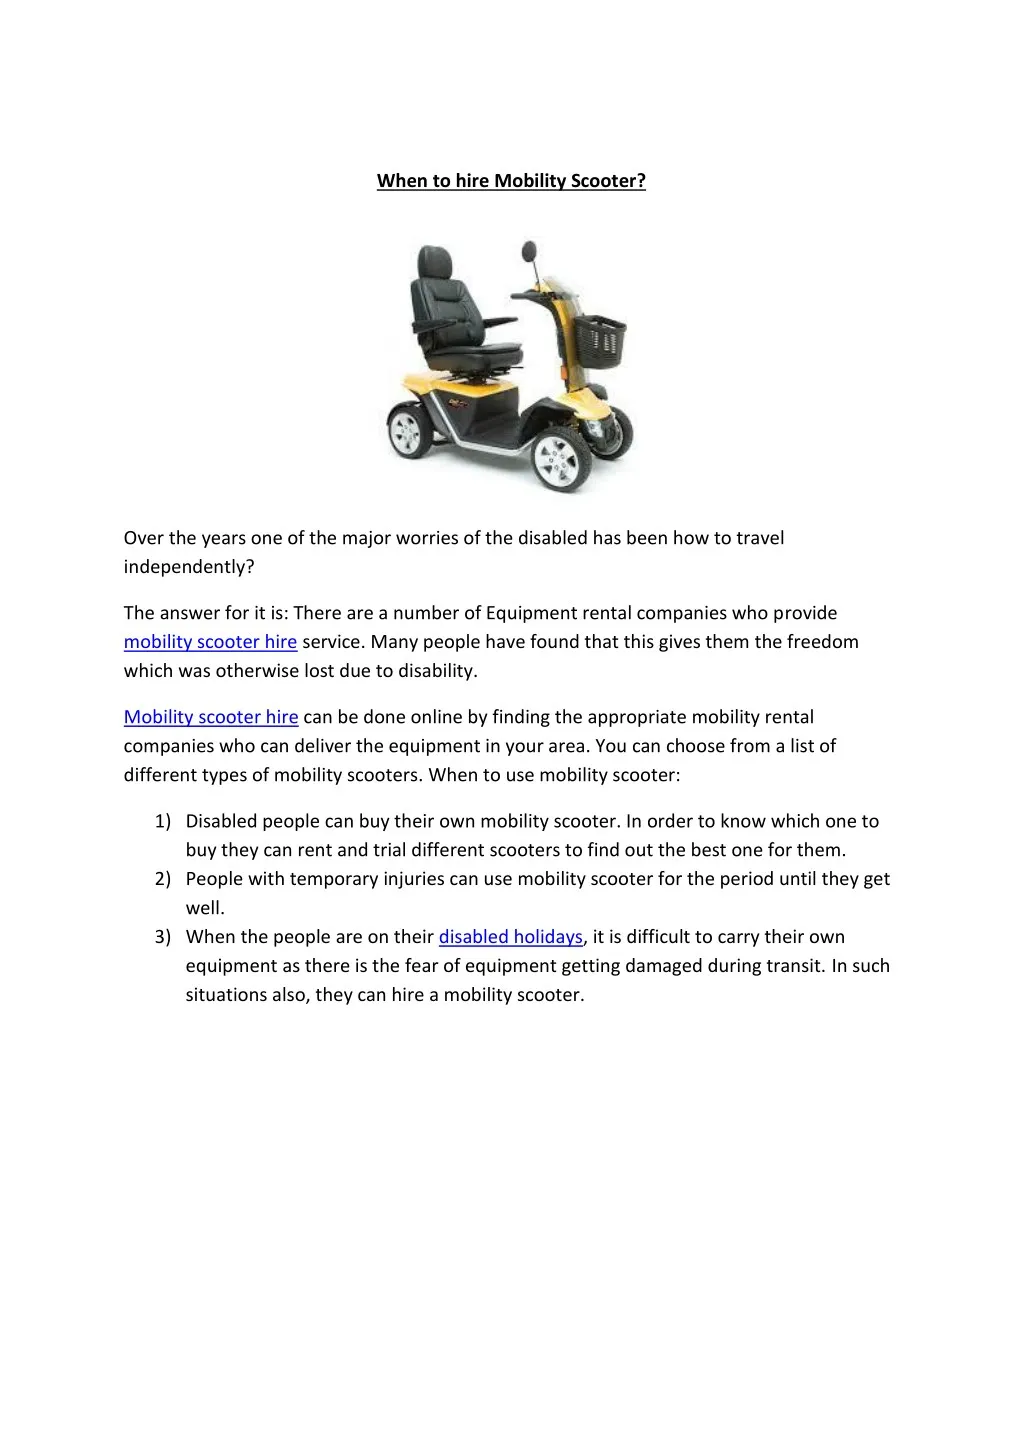 when to hire mobility scooter